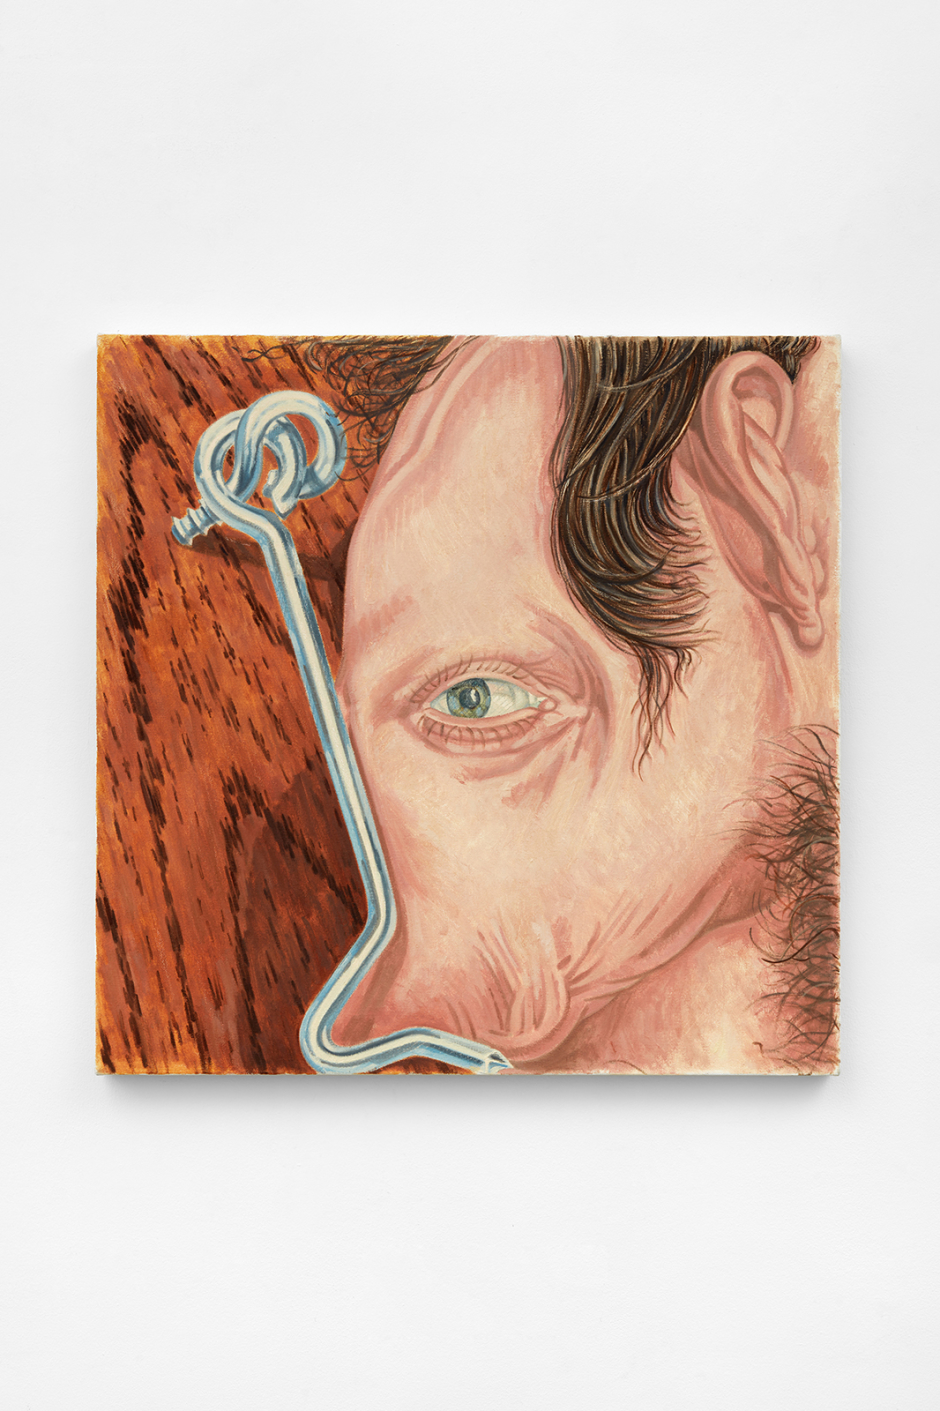 Hook Hook, 1990  Not signed or dated  oil on canvas  76.7 x 76.5 x 3.8 cm / 30 1/4 x 30 1/8 x 1 1/2 in